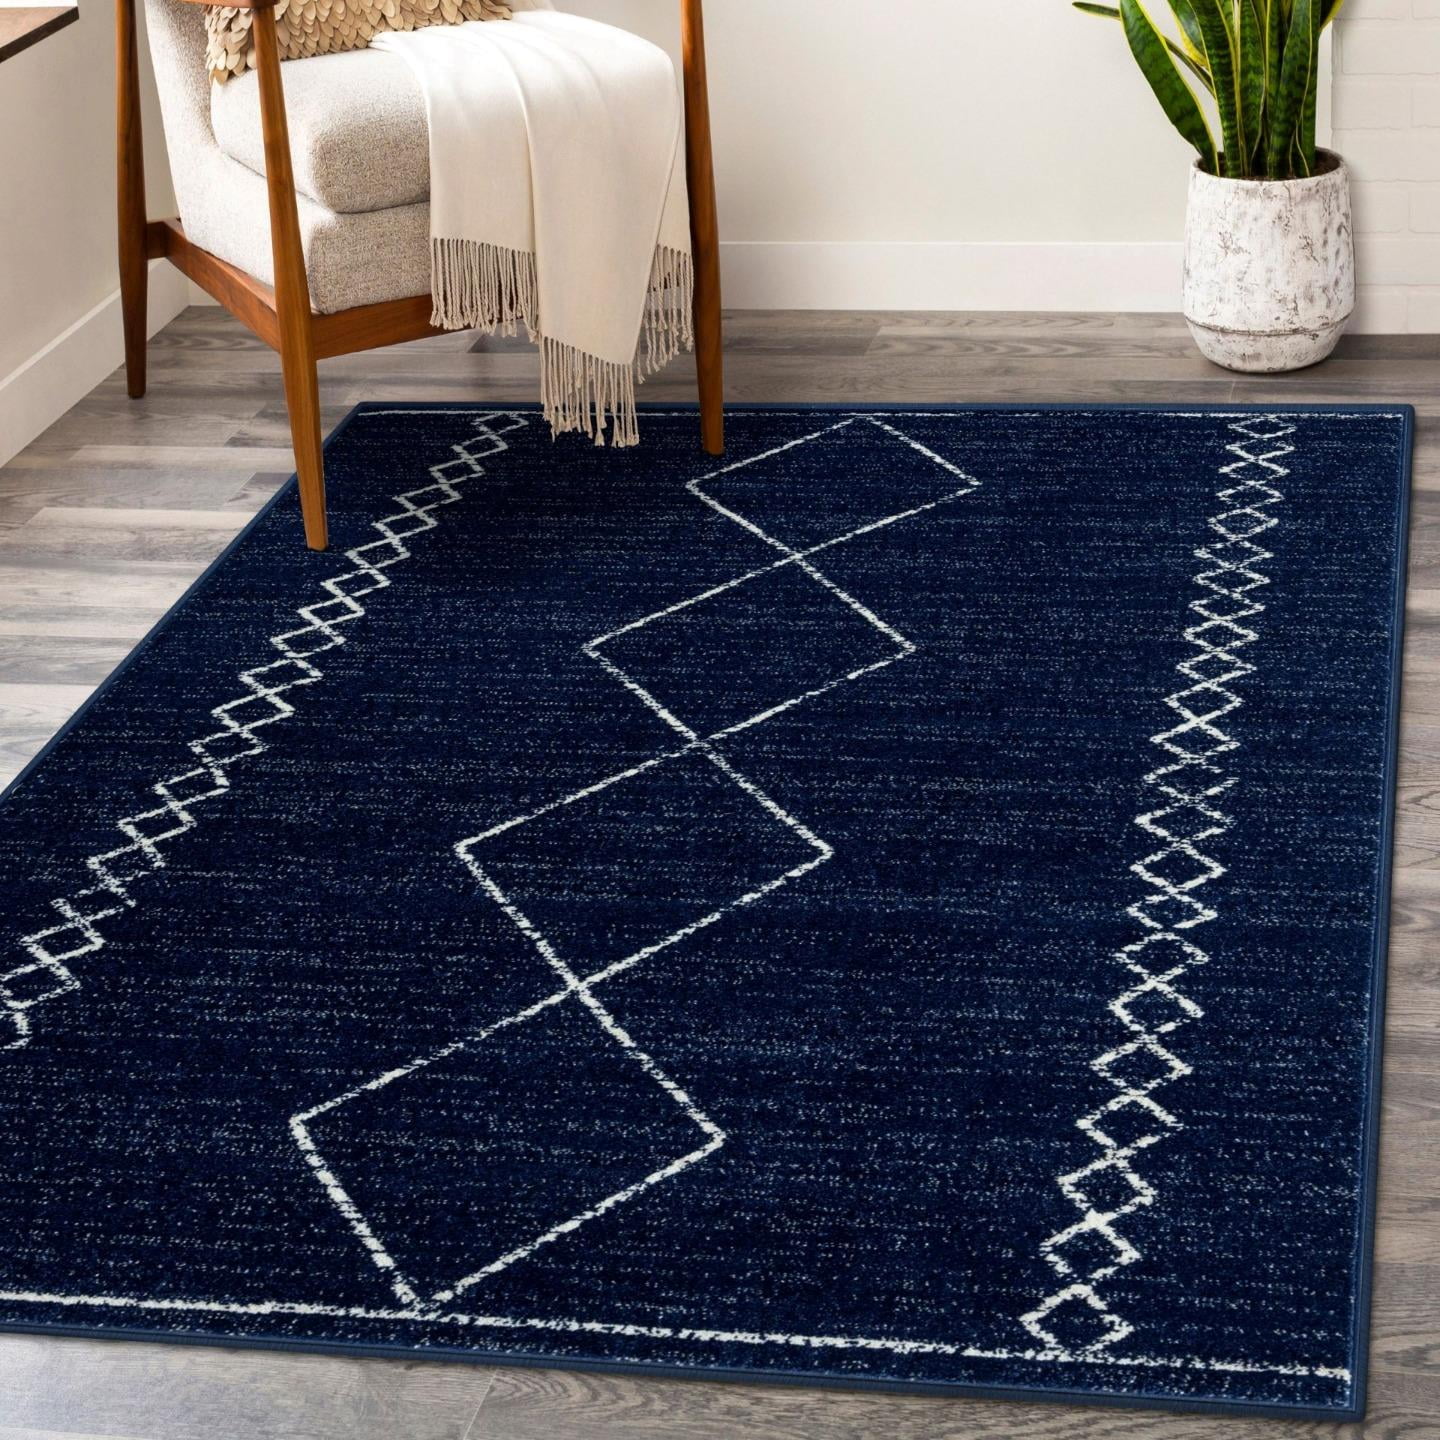 Paco Home Colorful Area Rug with Geometric Diamonds in Multicolor, Size:  5'3 x 7'7